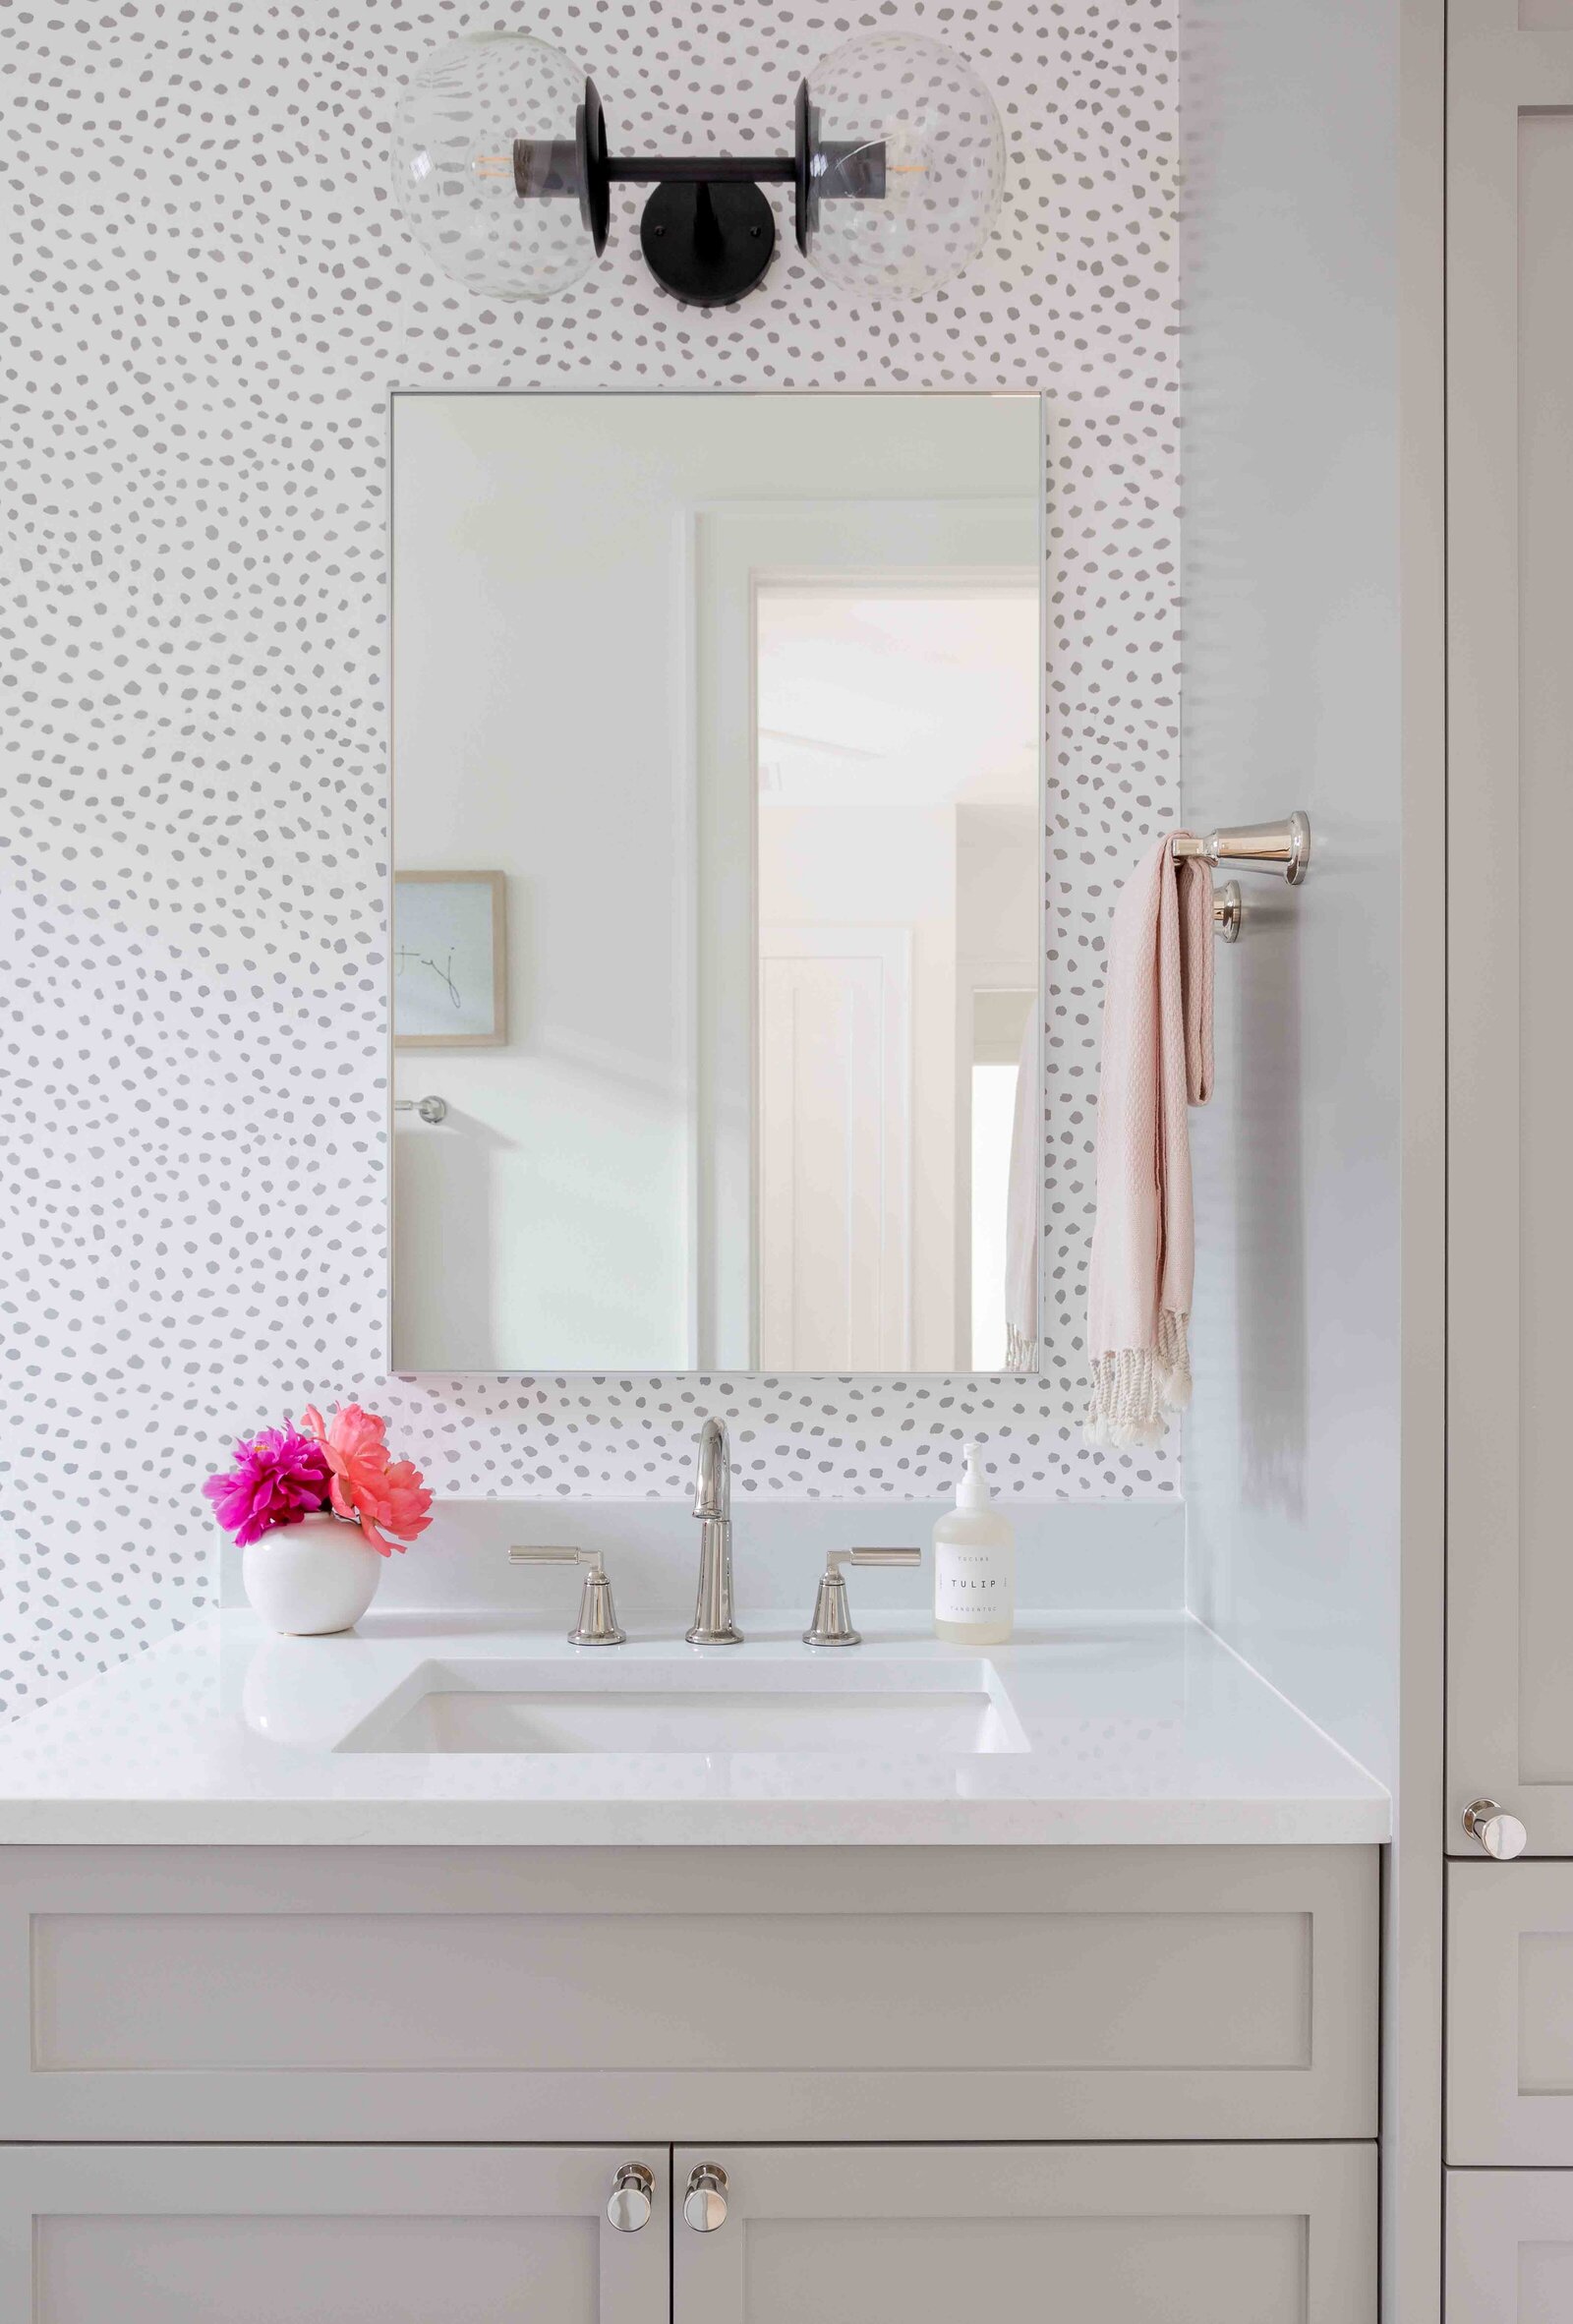 Nuela Designs Gray and White bathroom with polka dot wallpaper